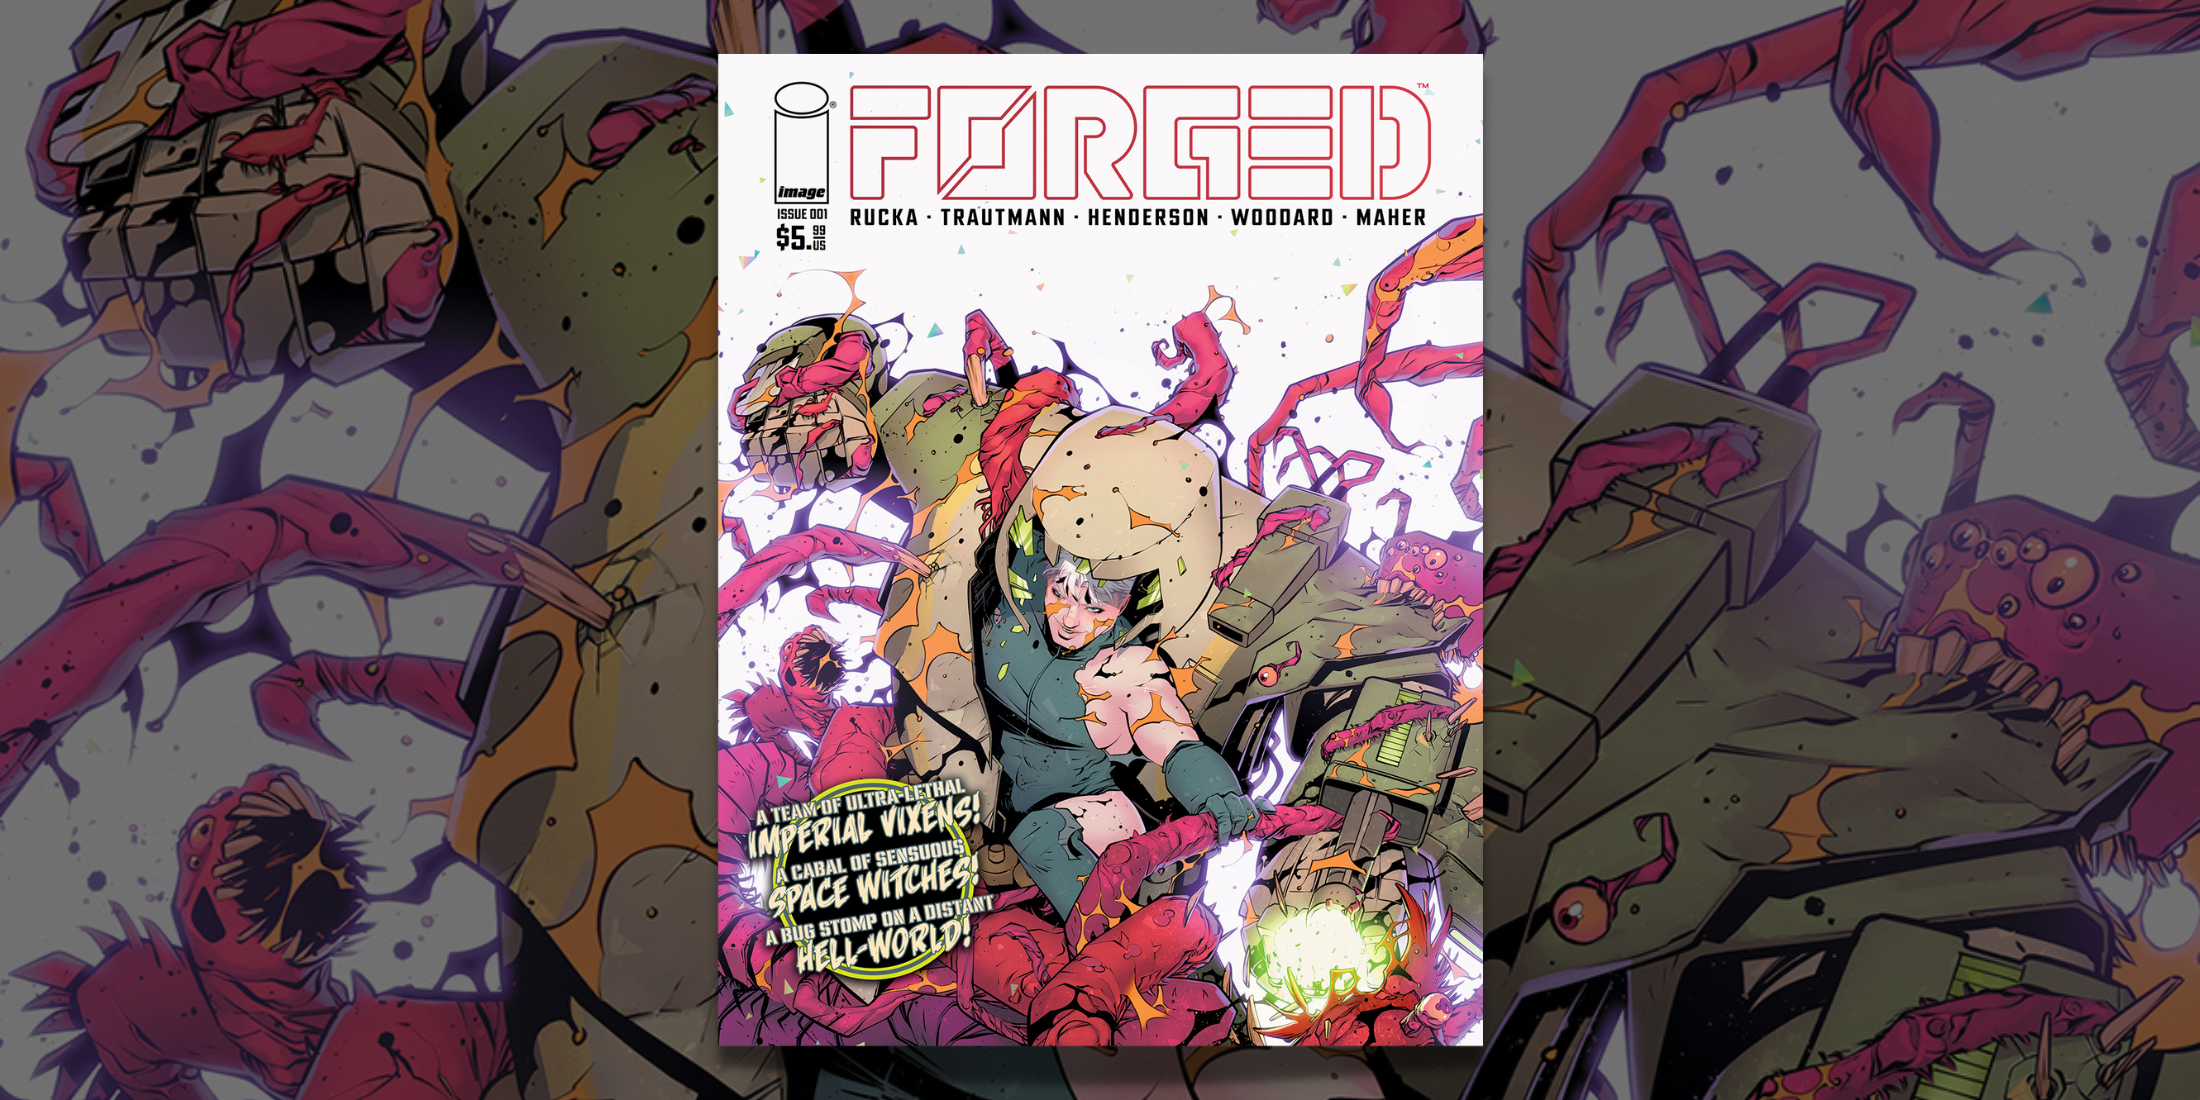 Forged: Rucka and Henderson Team Up for Action-Packed Sci-Fi Series